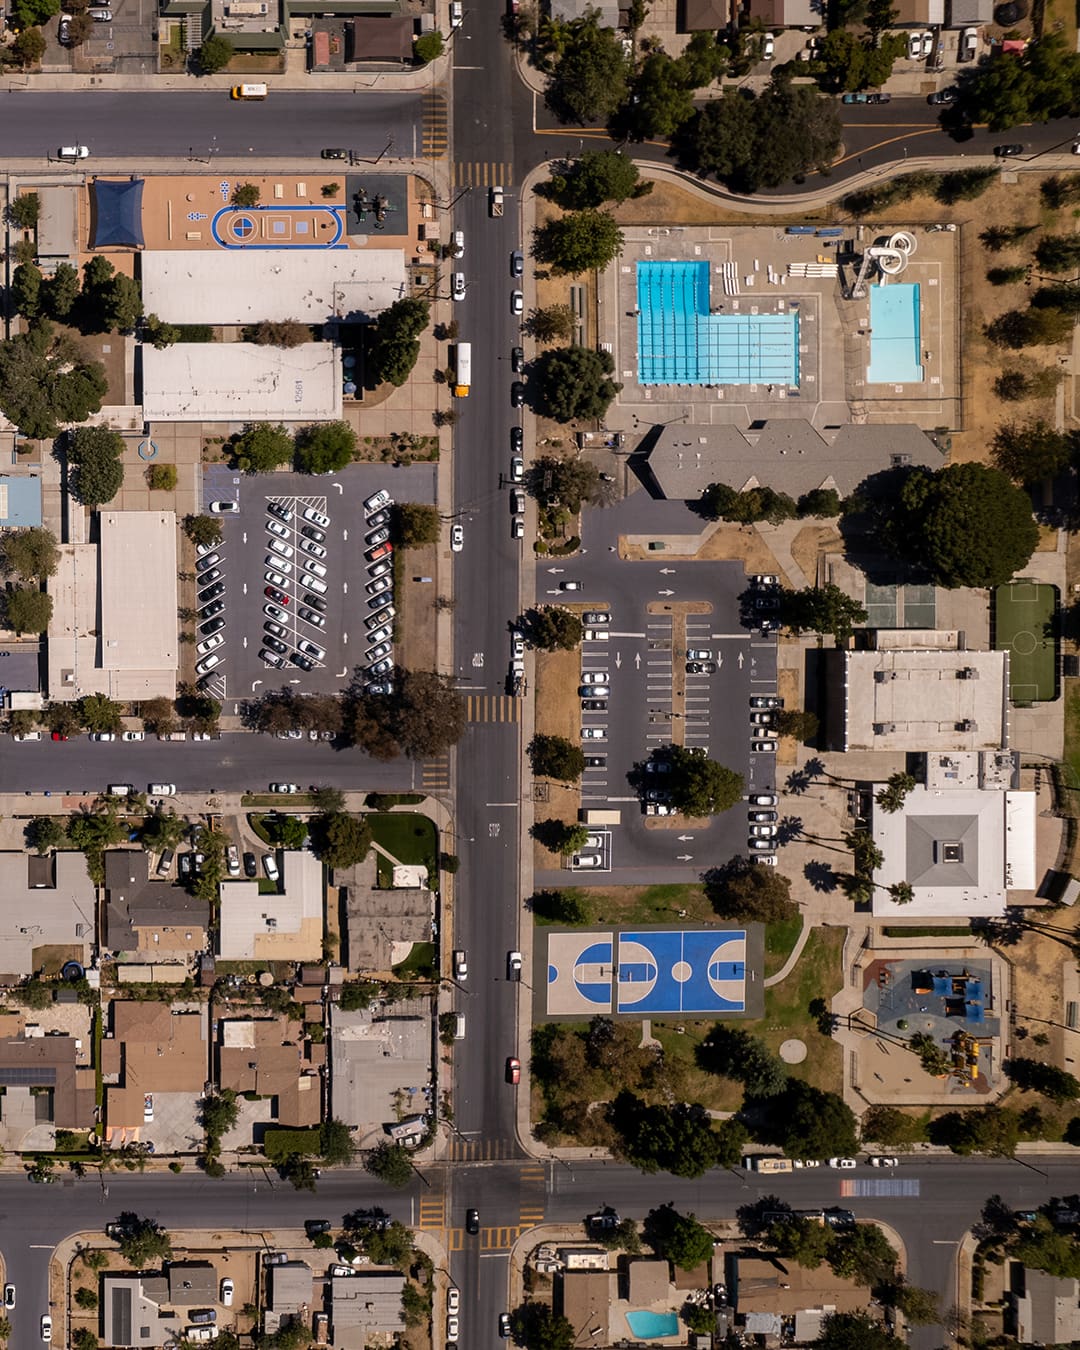 An aerial view of Pacoima featuring solar-reflective painted areas